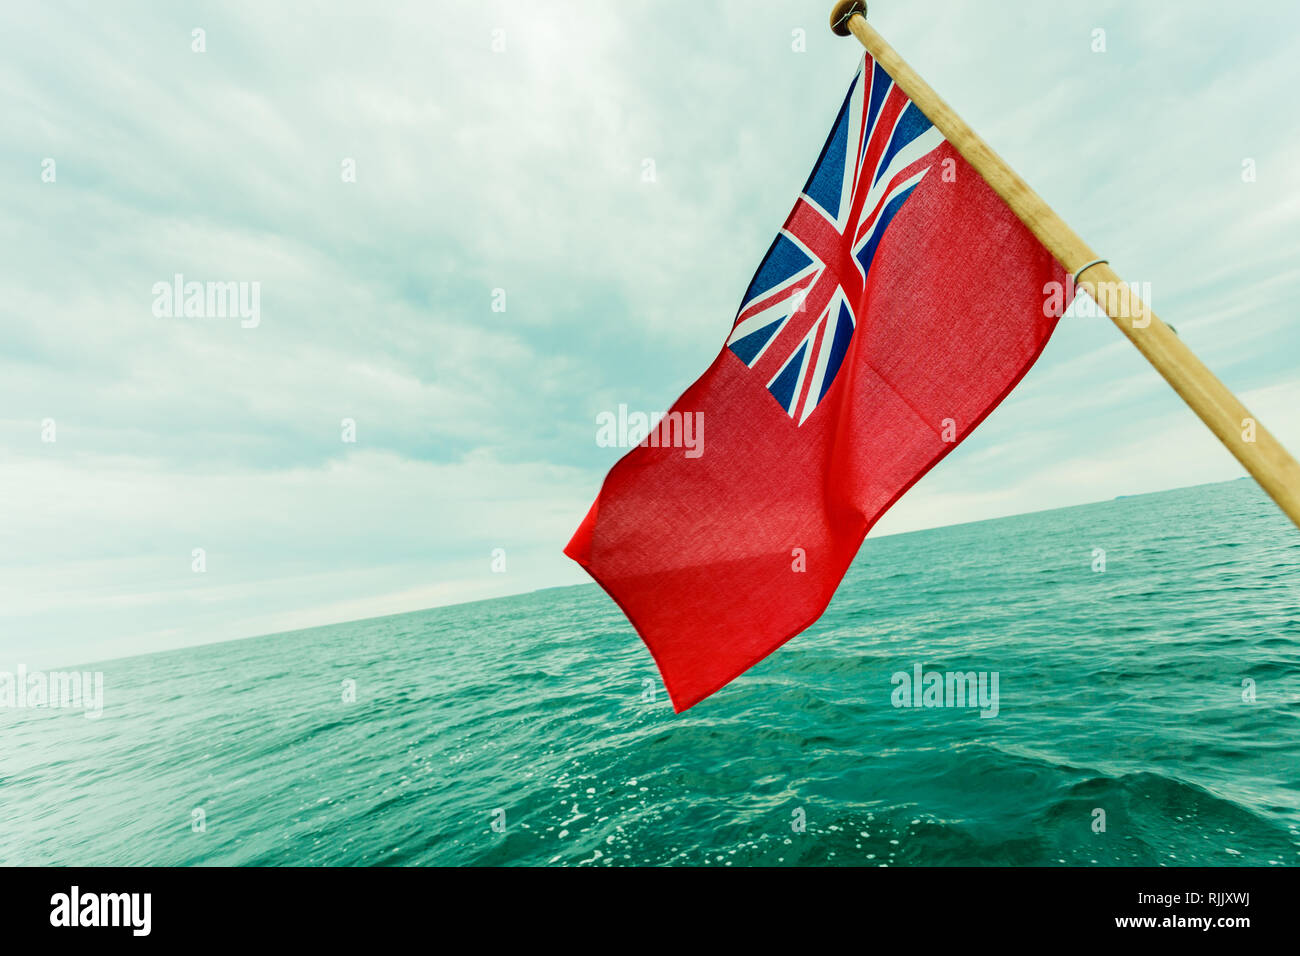 The uk red ensign the british maritime flag flown from yacht sail boat,  blue sky and baltic sea. Summer and travel voyage Stock Photo - Alamy